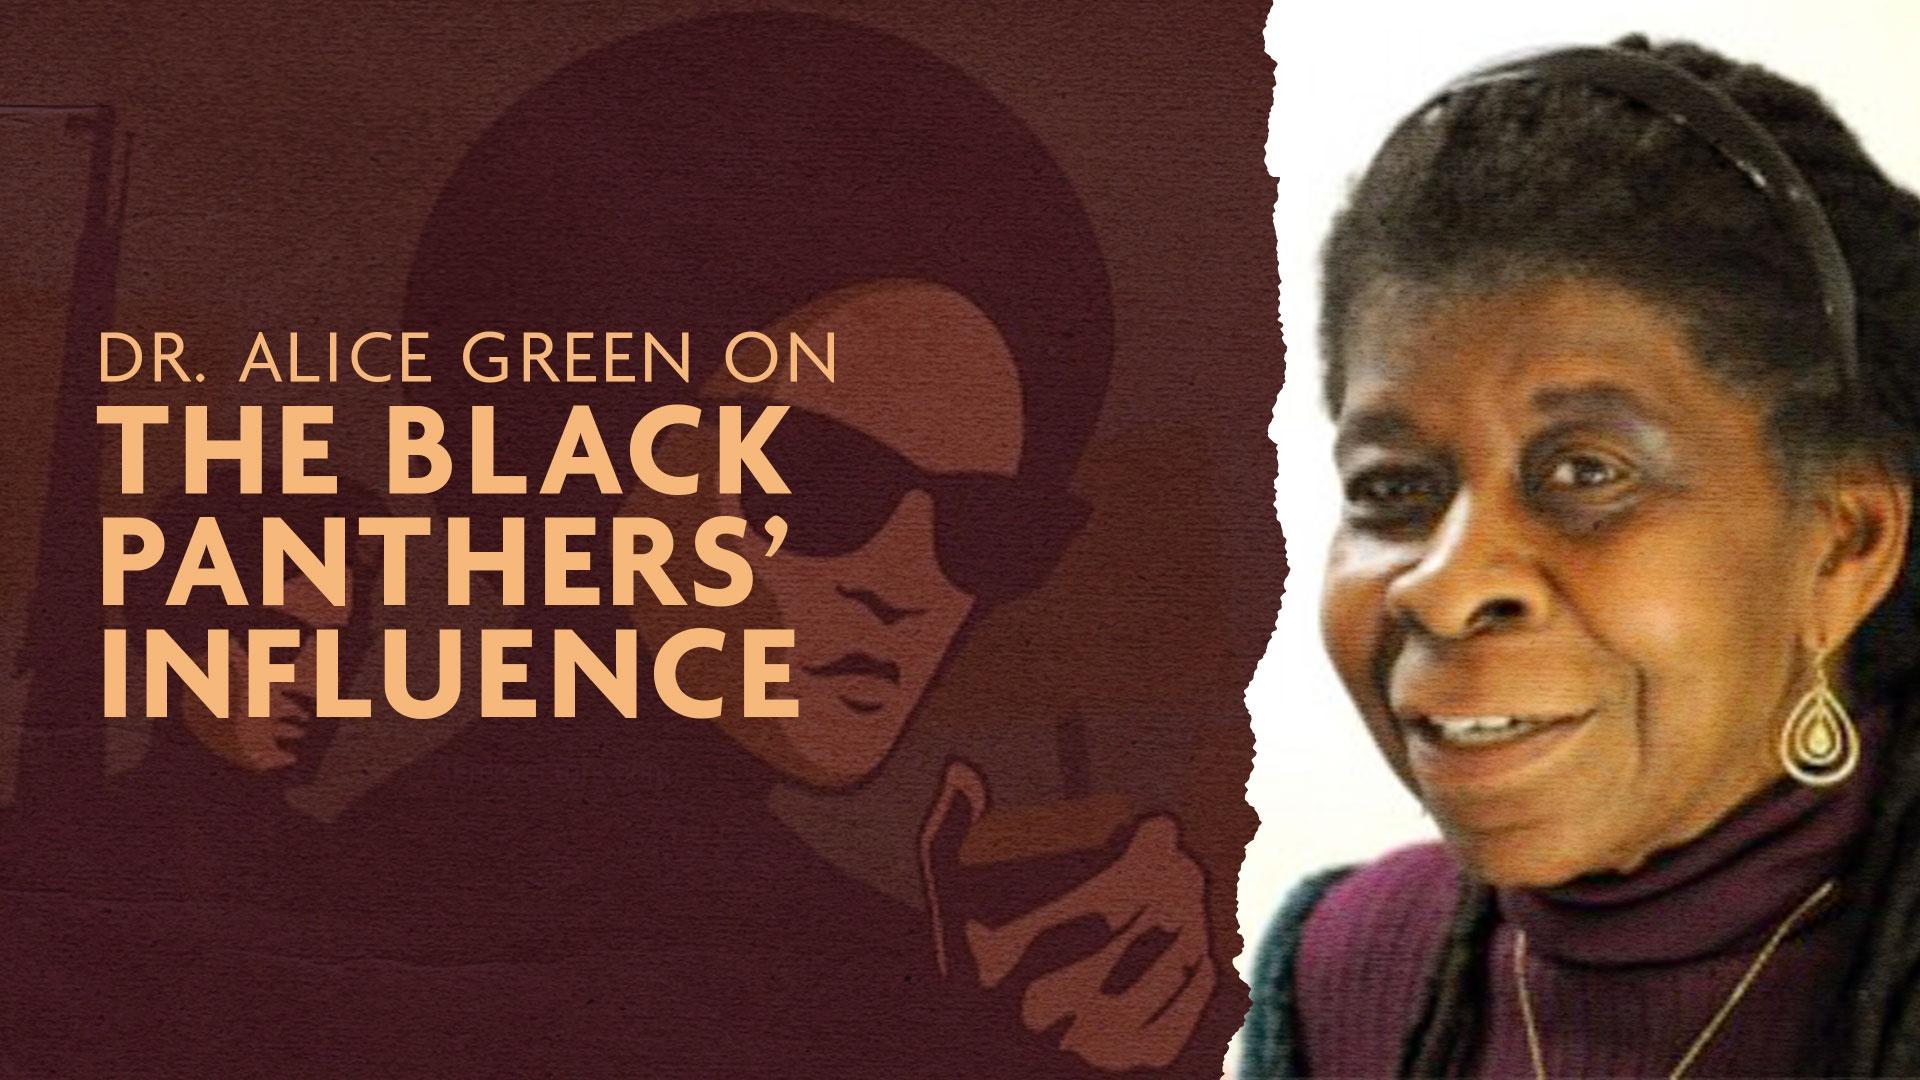 Dr. Alice Green on the Black Panthers’ Influence